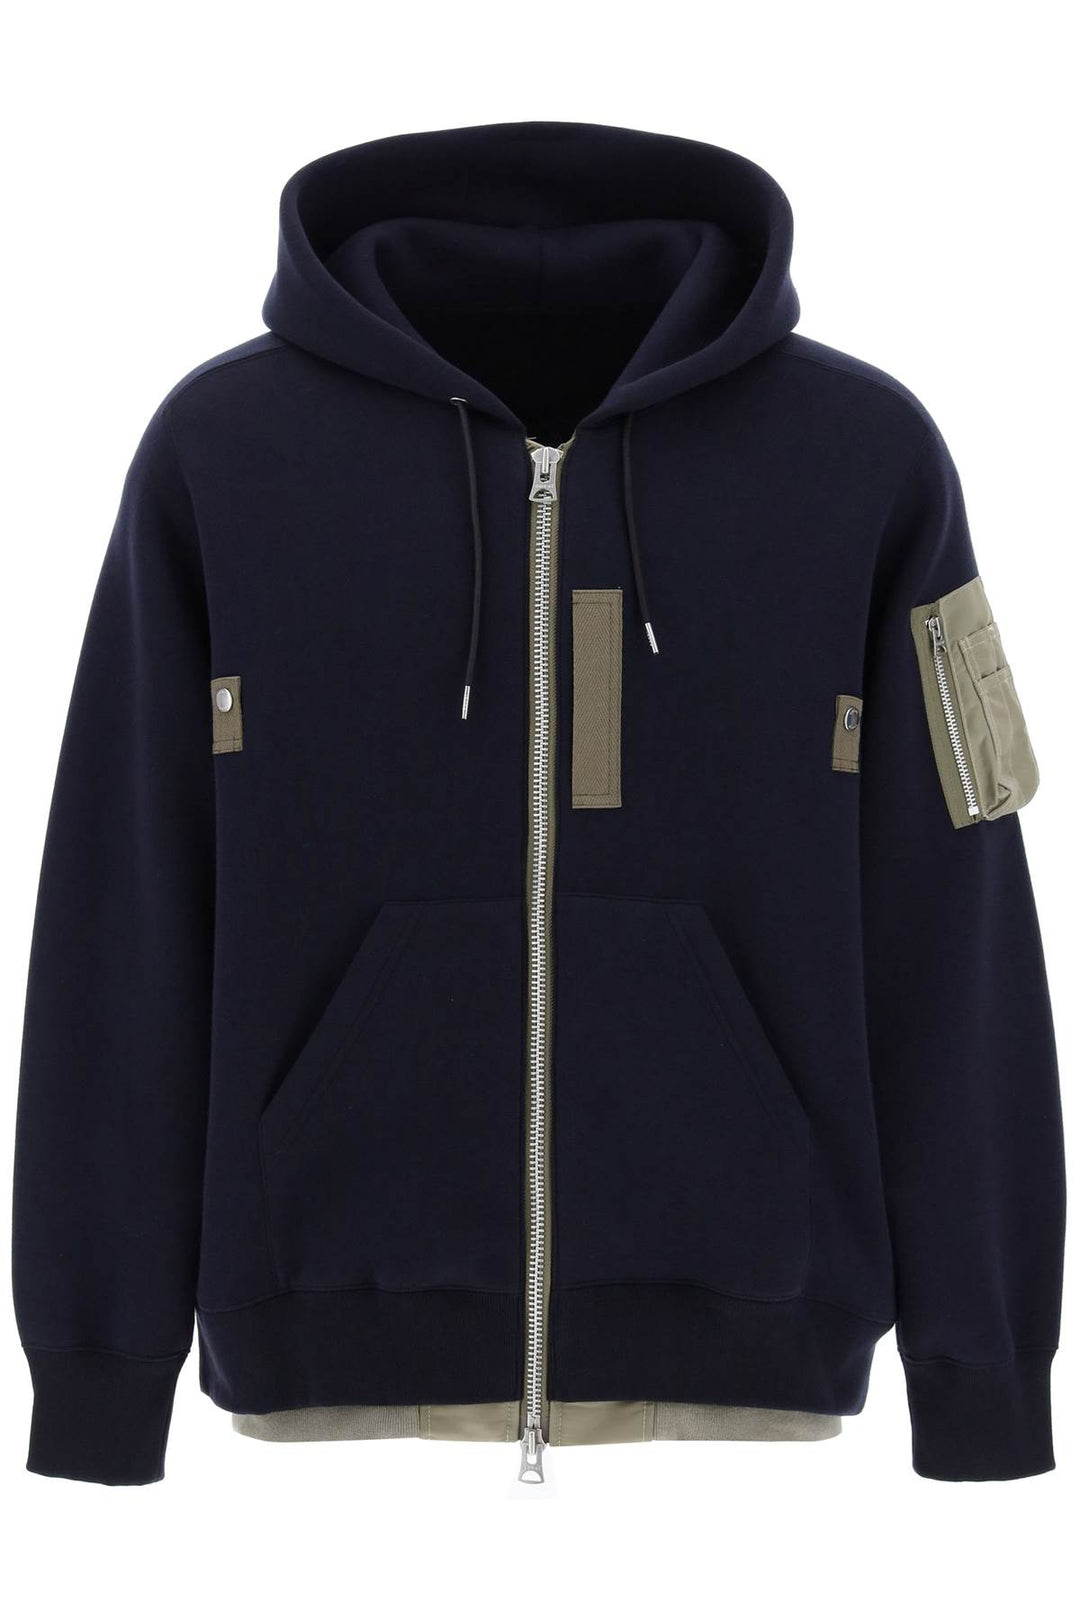 Sacai full zip hoodie with contrast trims-0